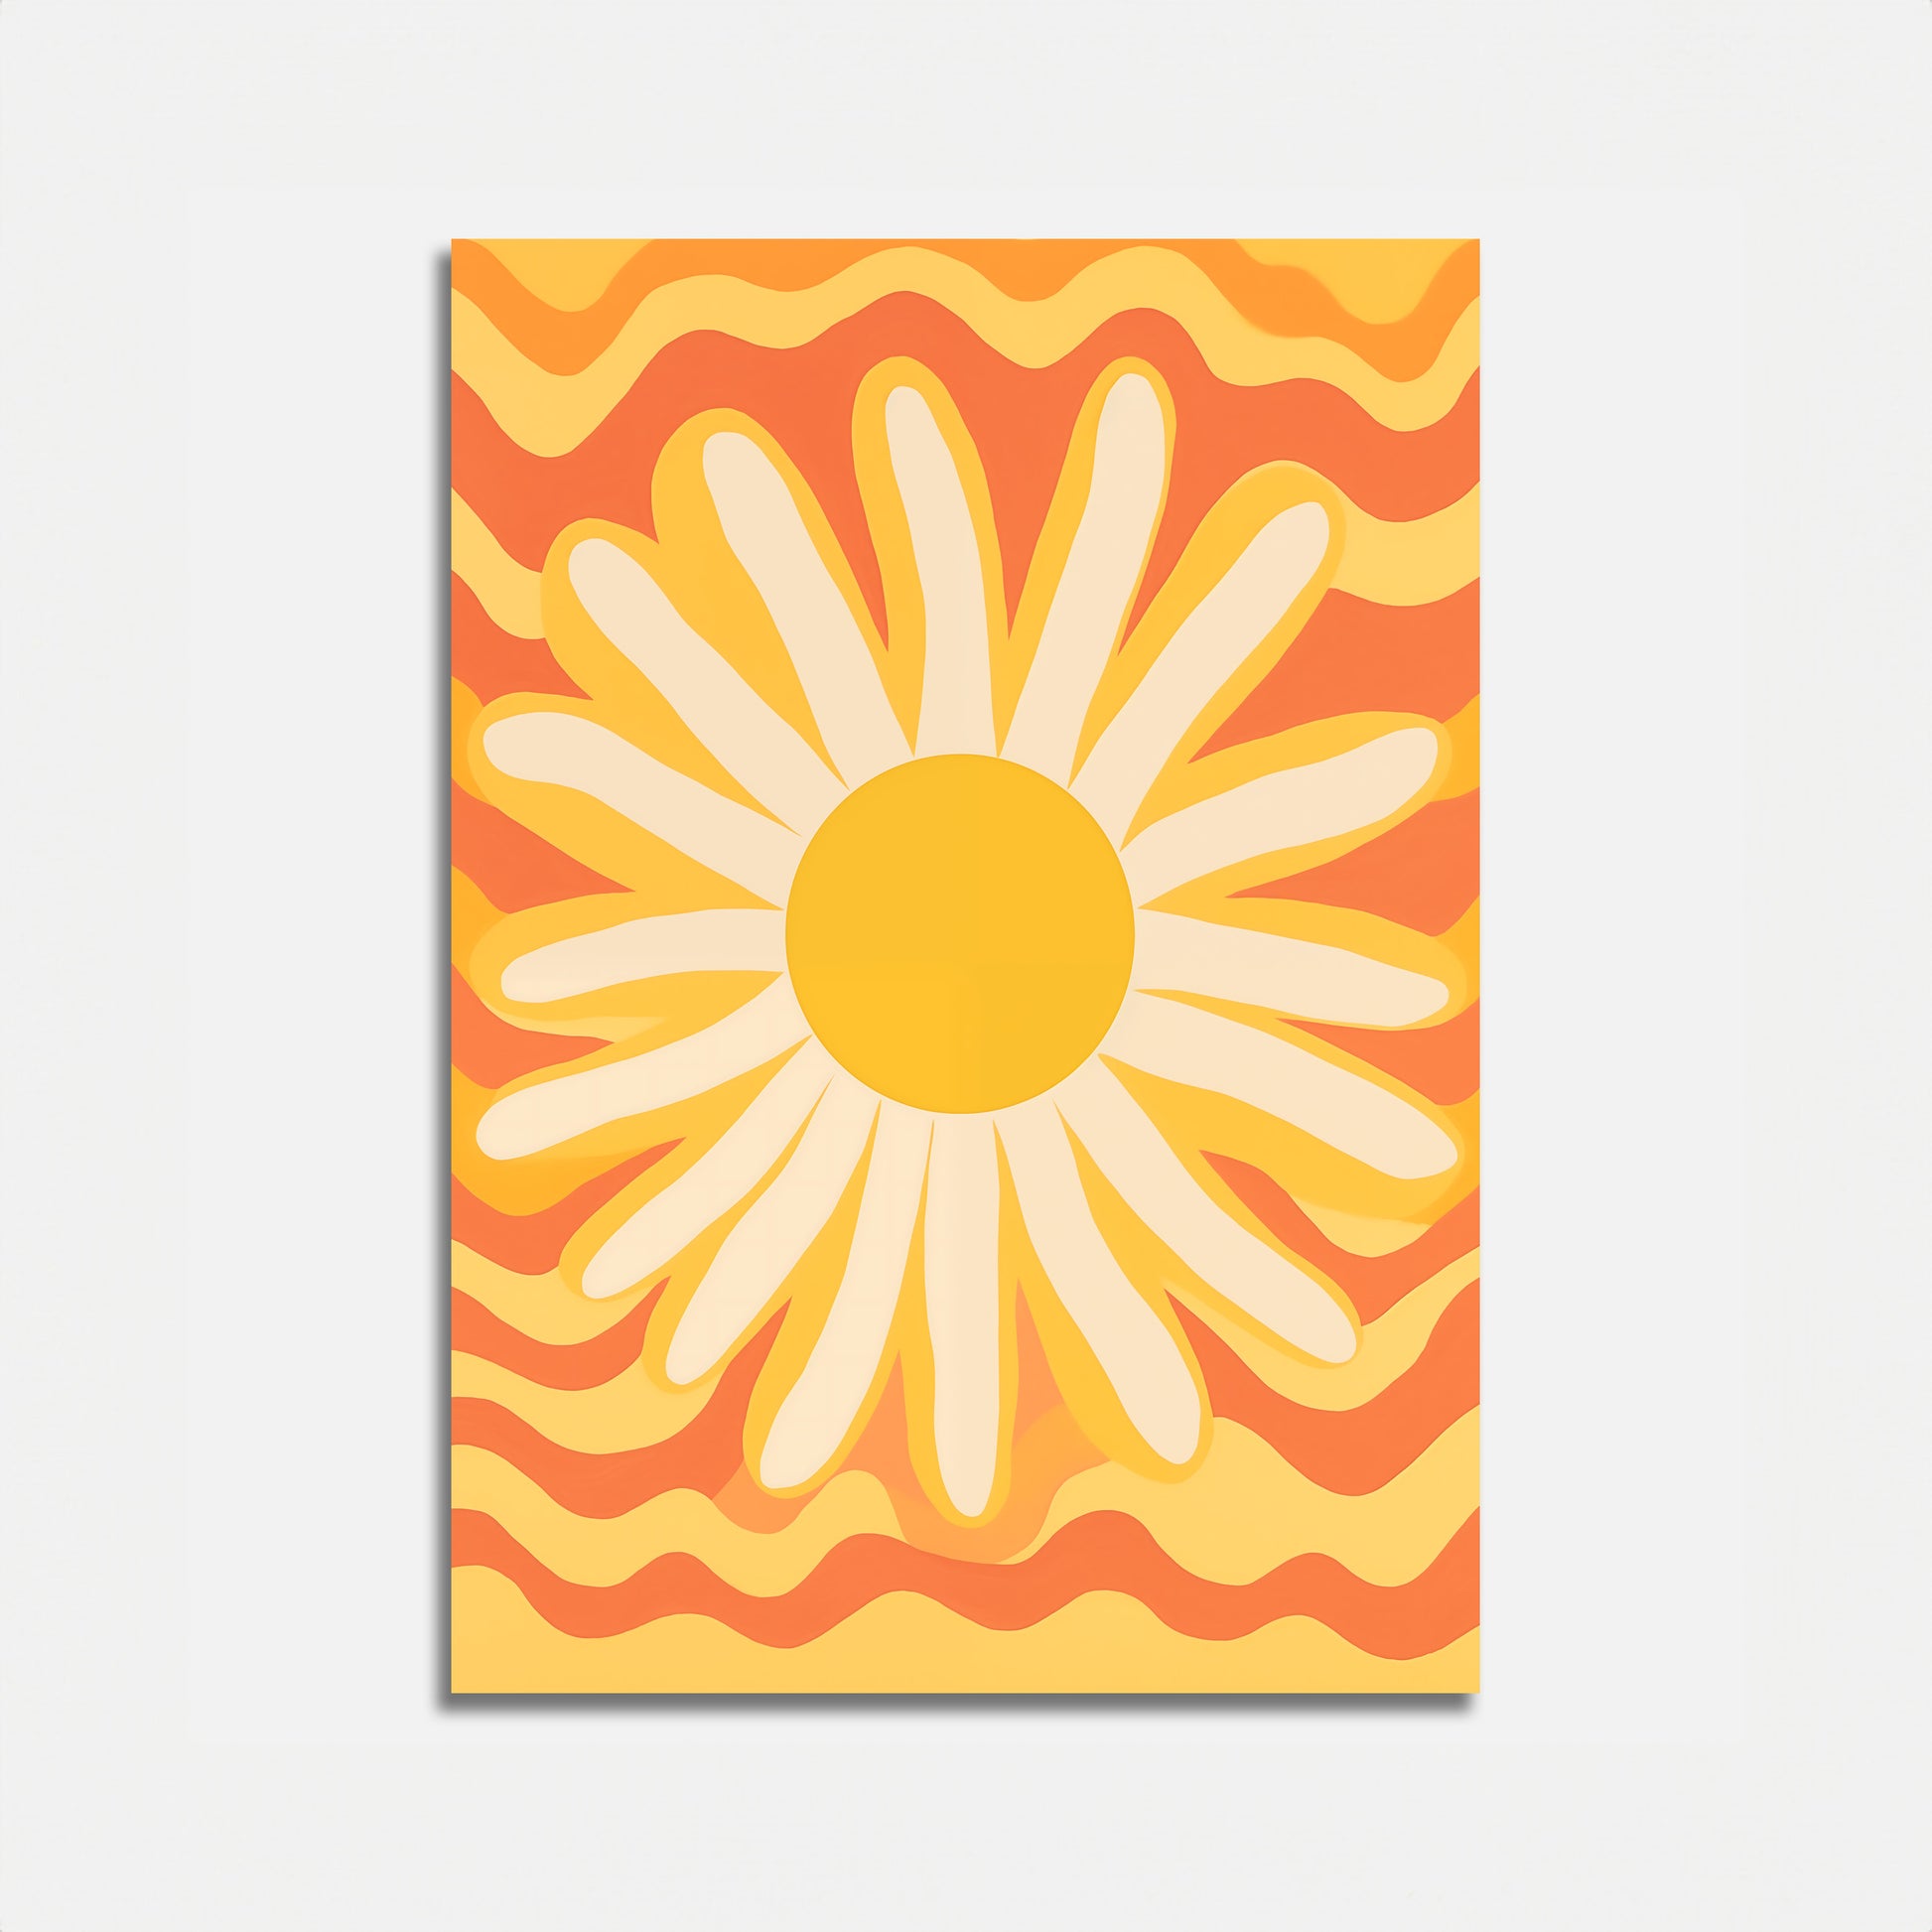 A vibrant graphic artwork of an abstract sunflower with wavy orange patterns.